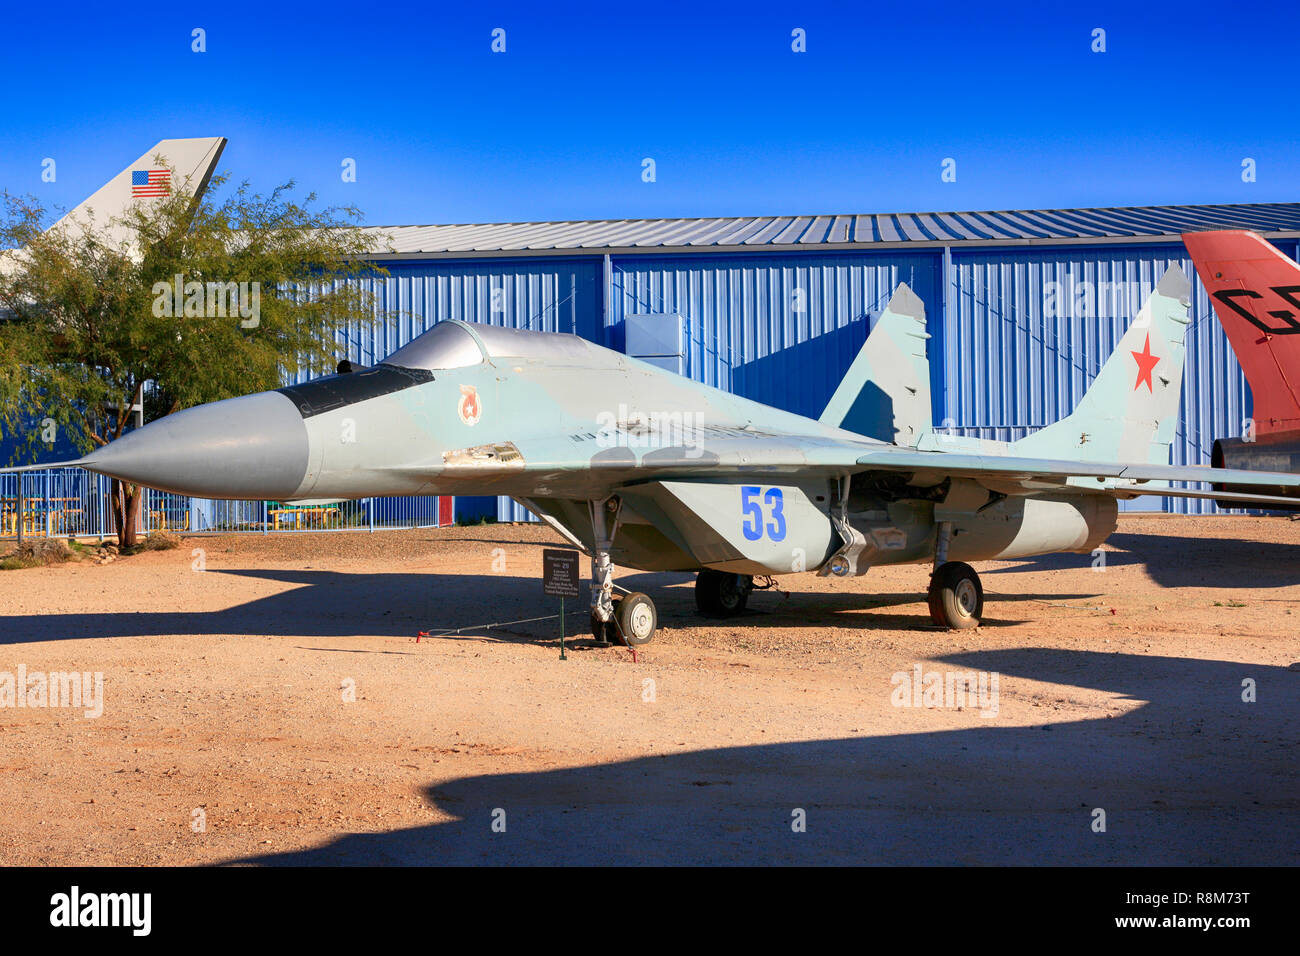 Russian Mig-29 'Fulcrum' 1980s jet fighter plane on display at the Pima Air & Space Museum in Tucson, AZ Stock Photo